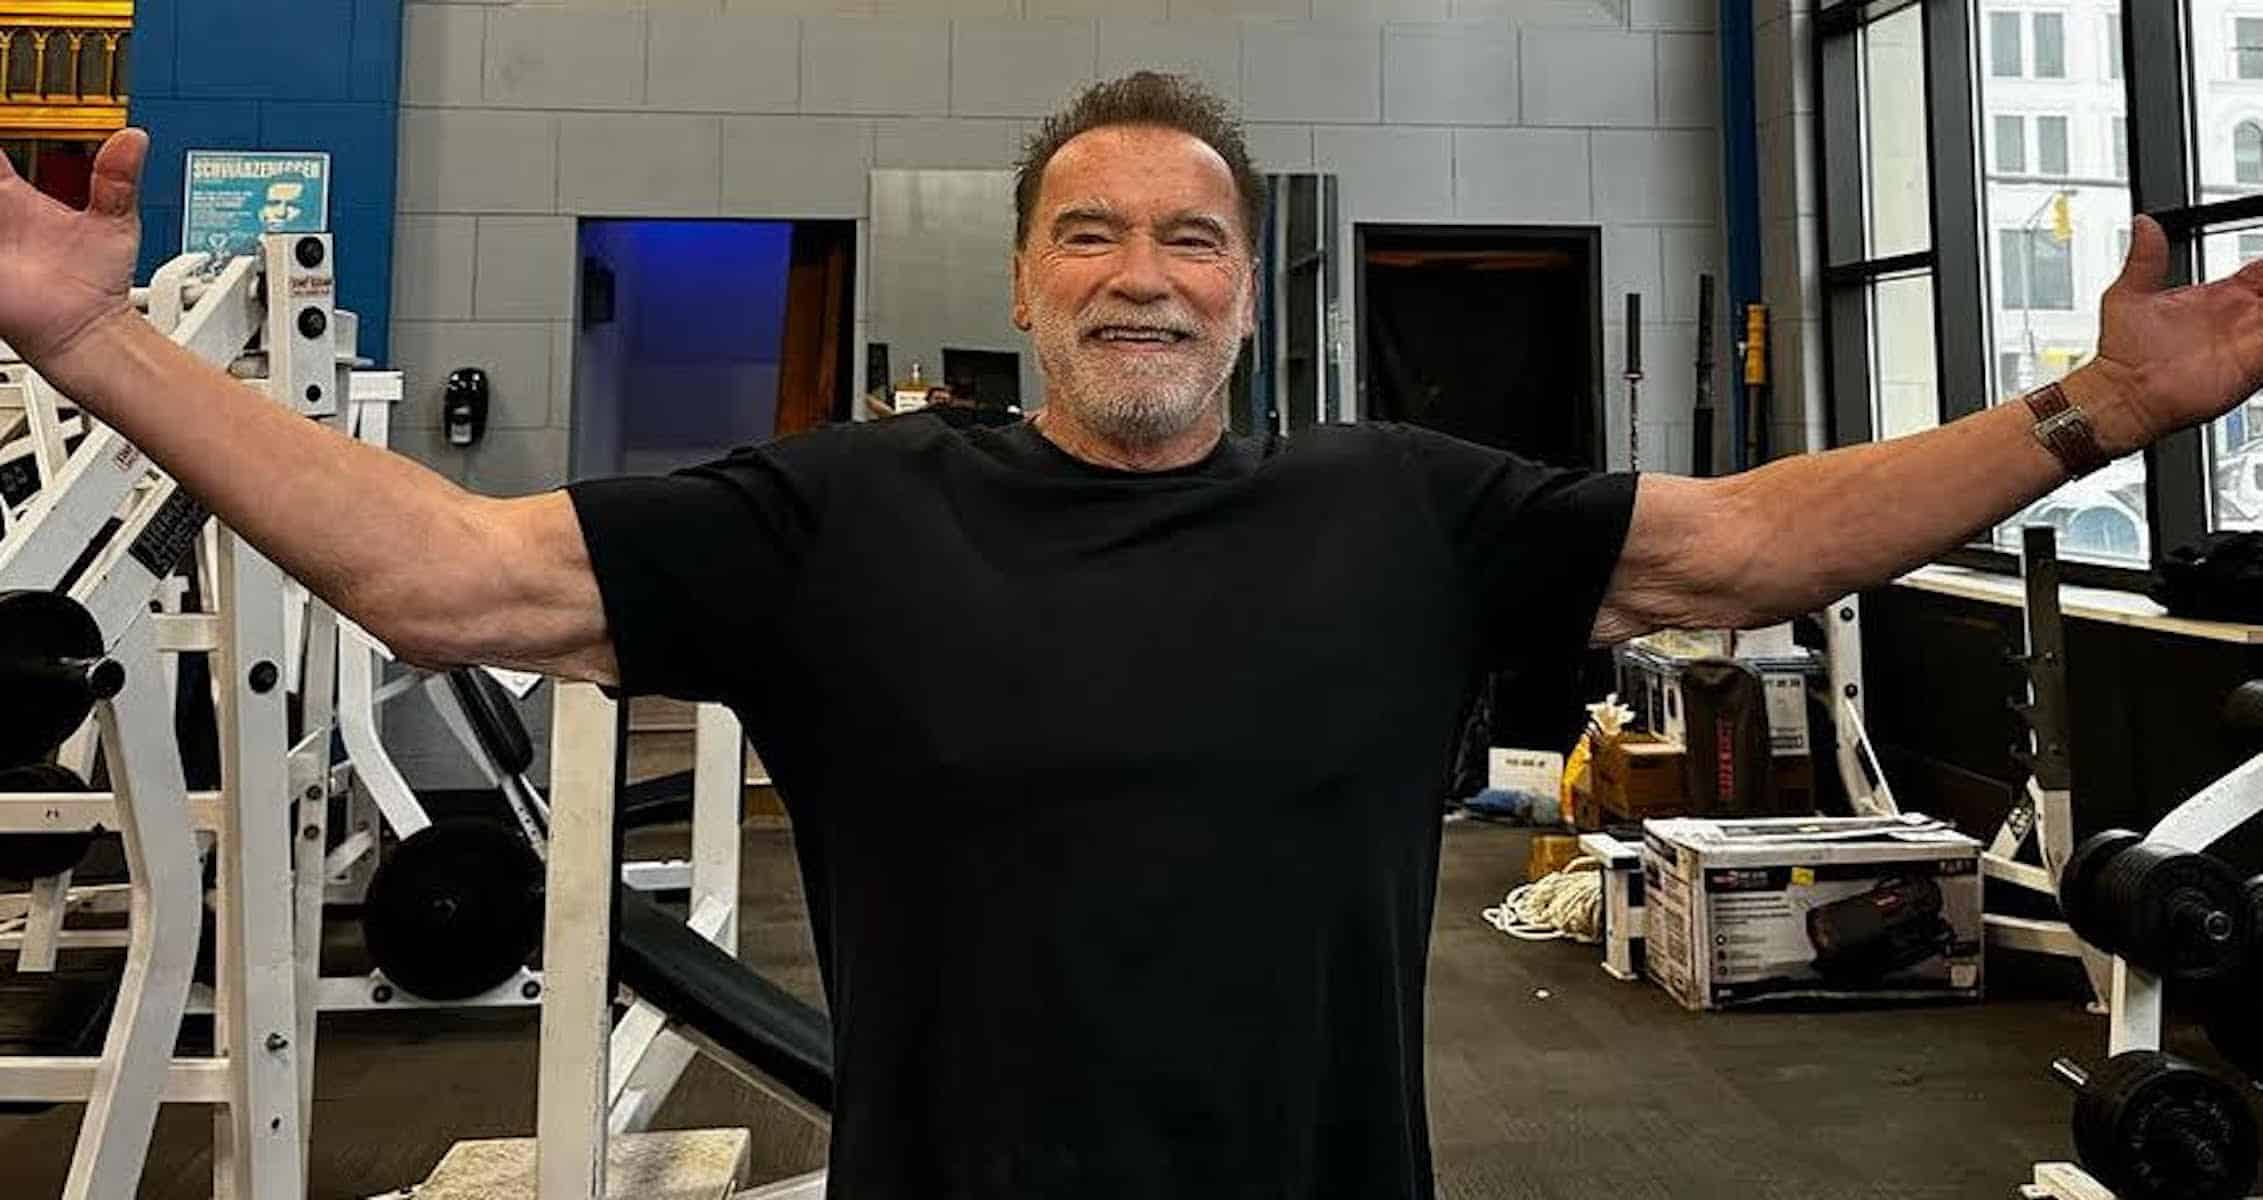 Arnold Schwarzenegger shared what the best type of creatine to take is.